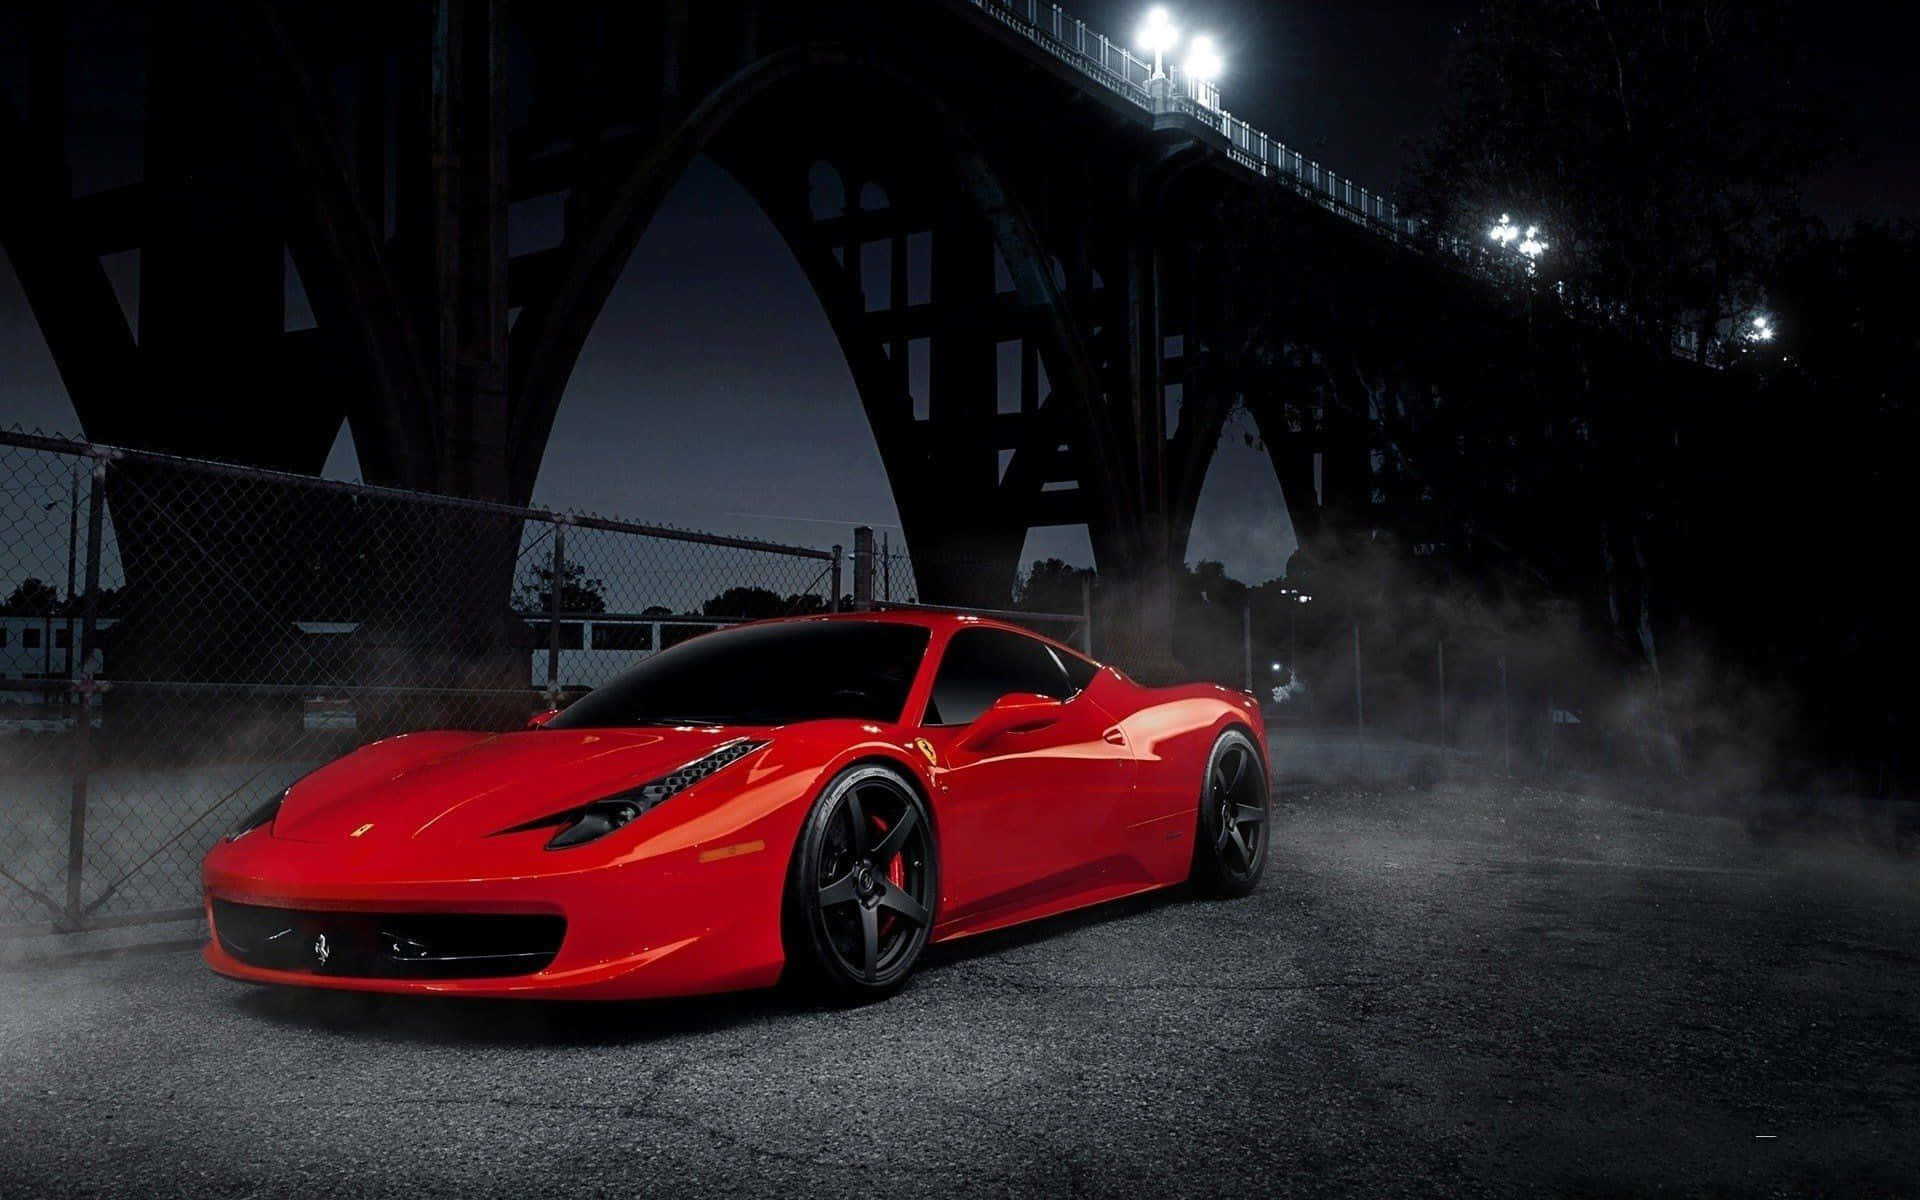 Ferrari 458 Speciale - A Stunning Masterpiece of Engineering and Design Wallpaper